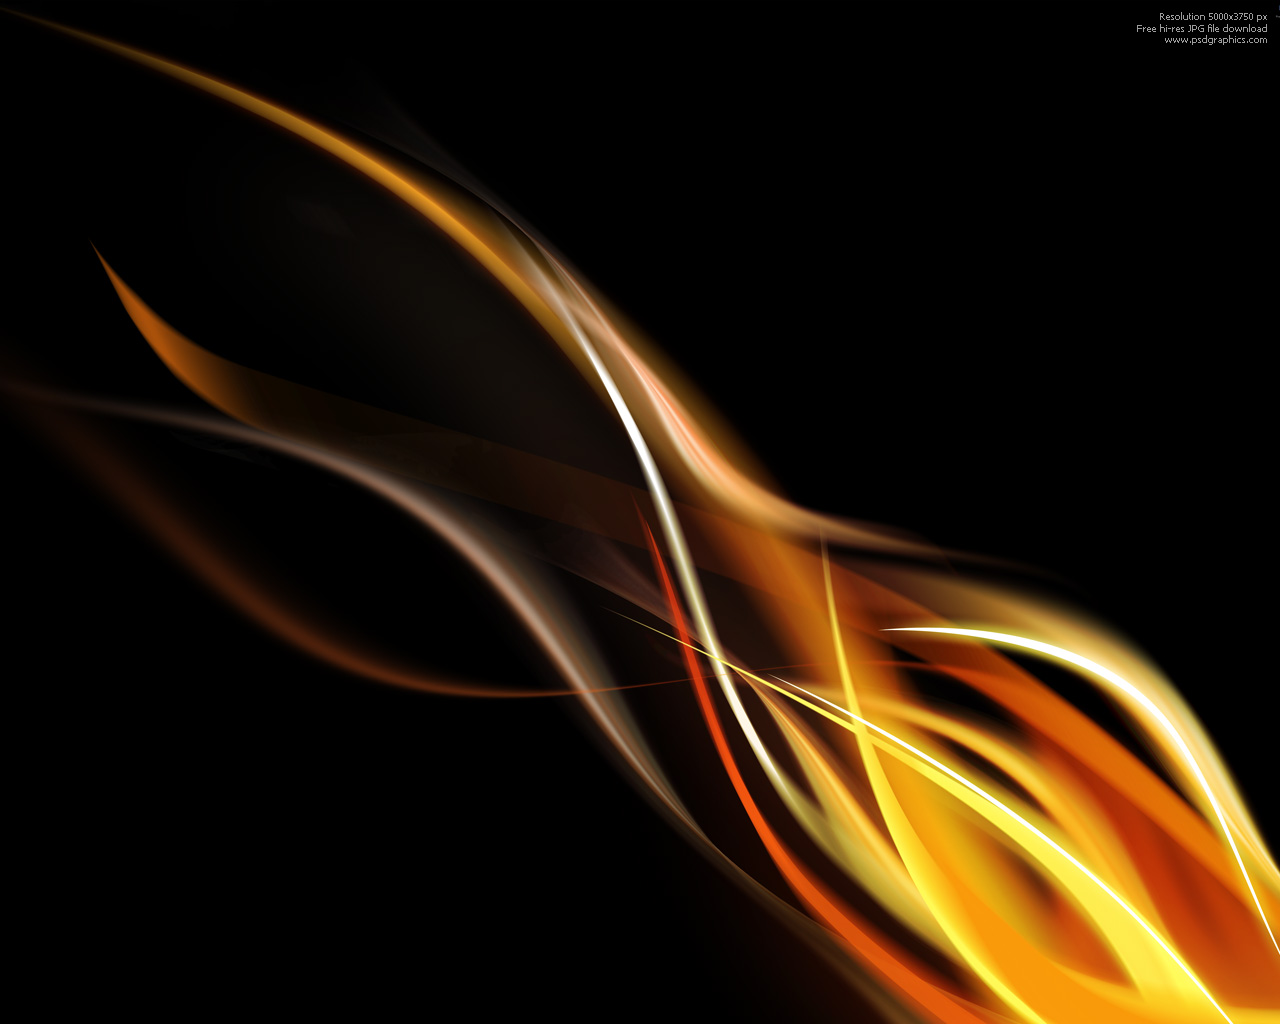 Flame background 12801024